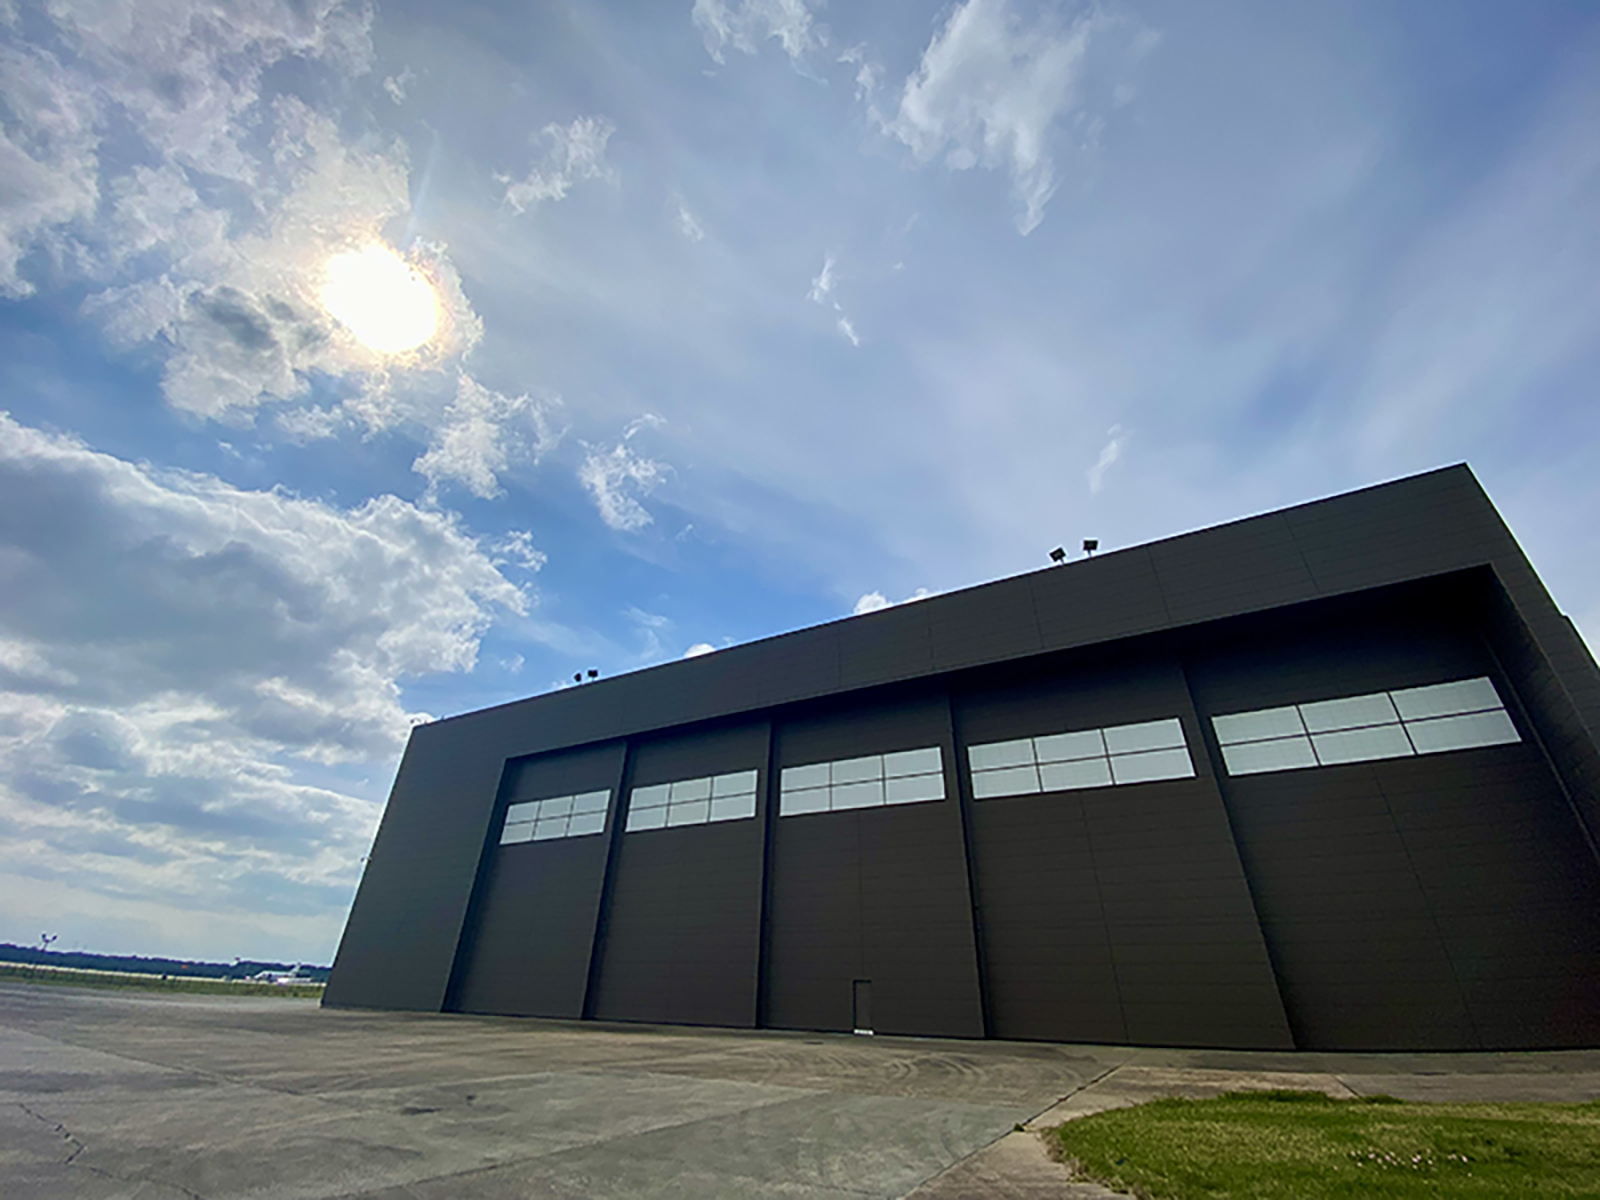 The maintenance complex includes two aircraft bays and ramp space for up to four aircraft, as well as warehouse, shops, and office space.